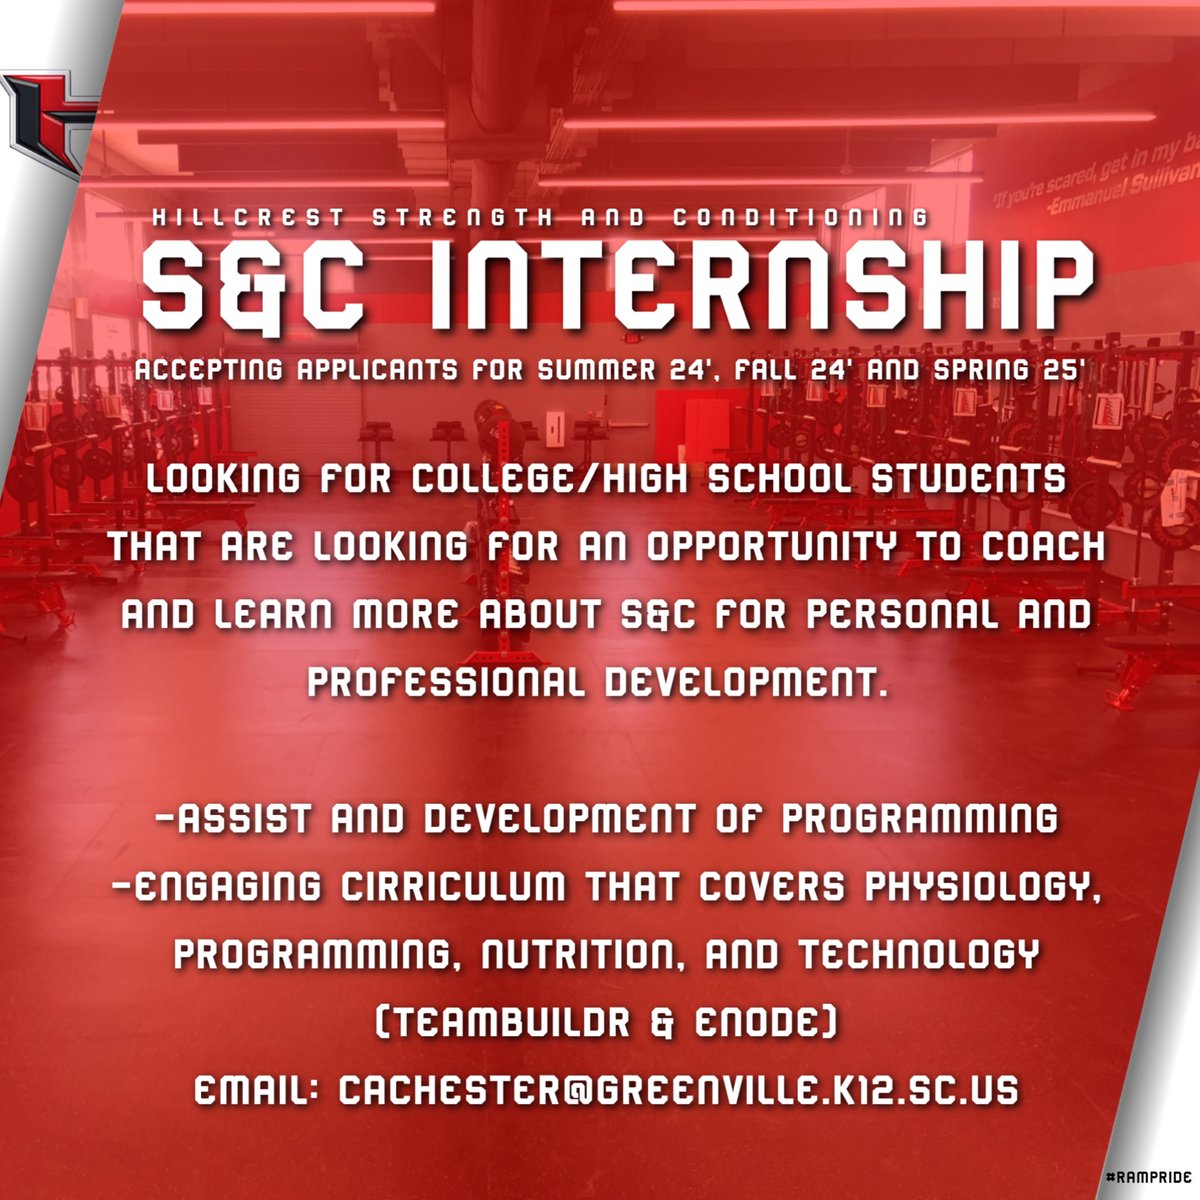 With the growing of our program we’re looking for interns to help meet the demand of our teams! Whether a high school or college student in the area who is interested in Strength and Conditioning, would be a good opportunity to learn with hands on experience.